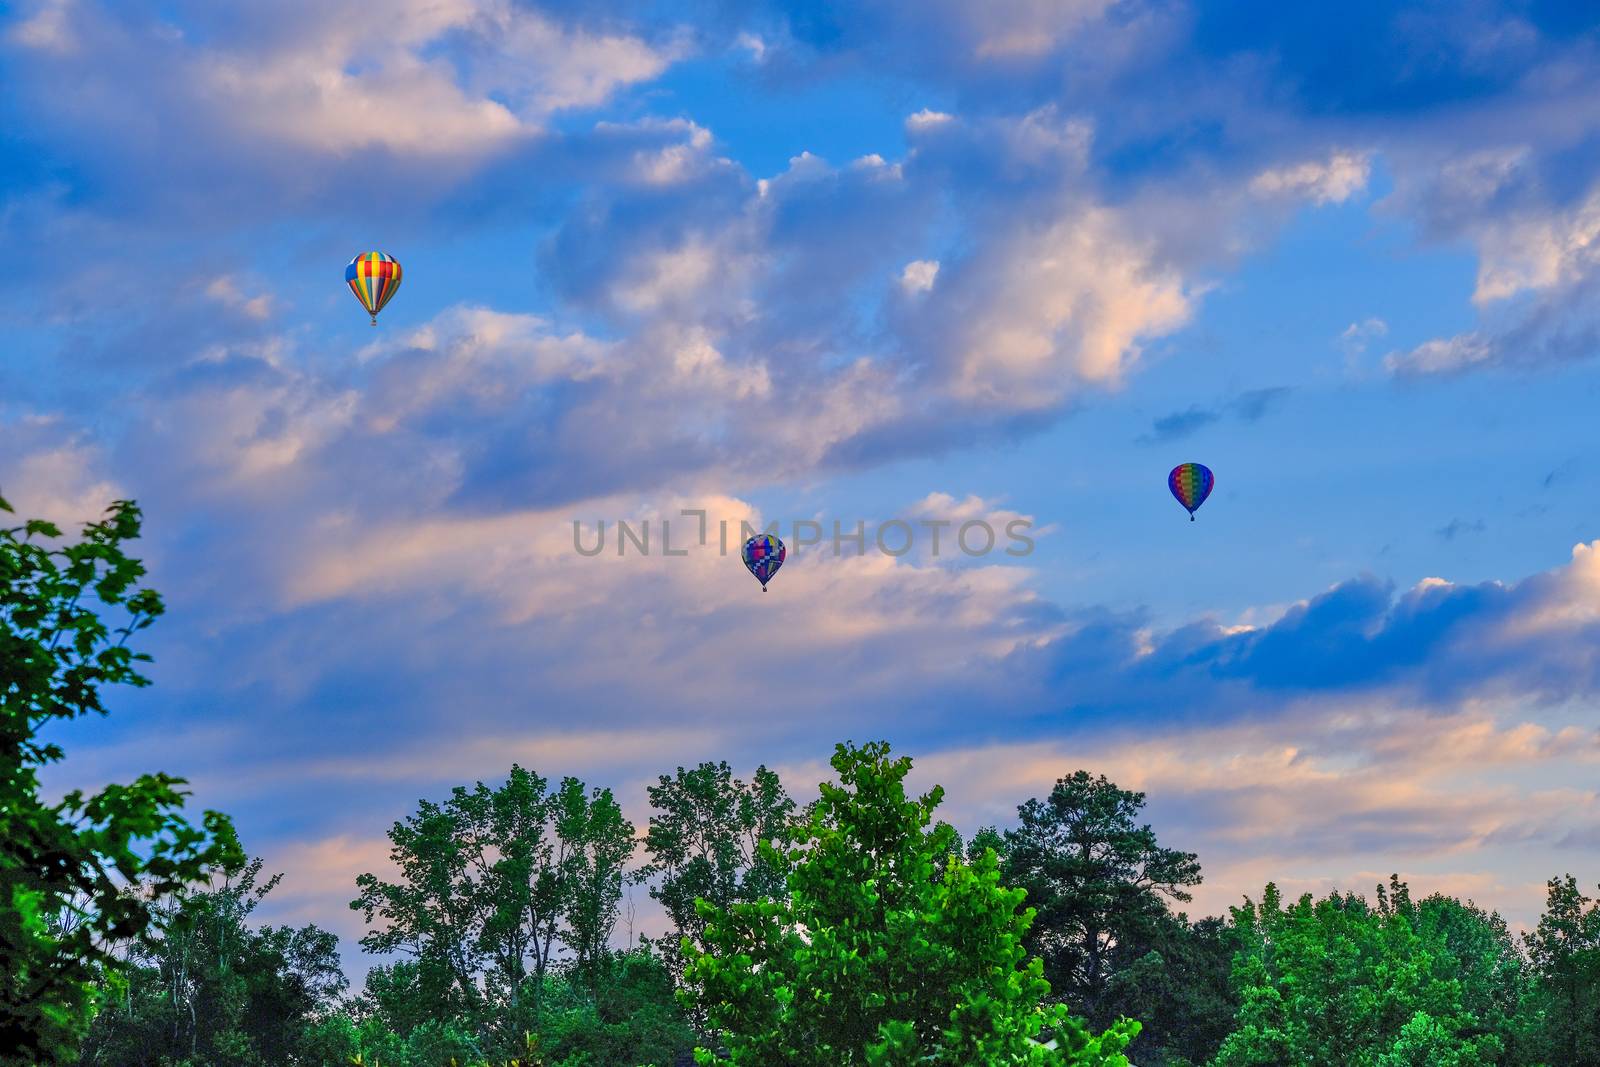 Colorful hot air balloons floating in a nice sky over green trees